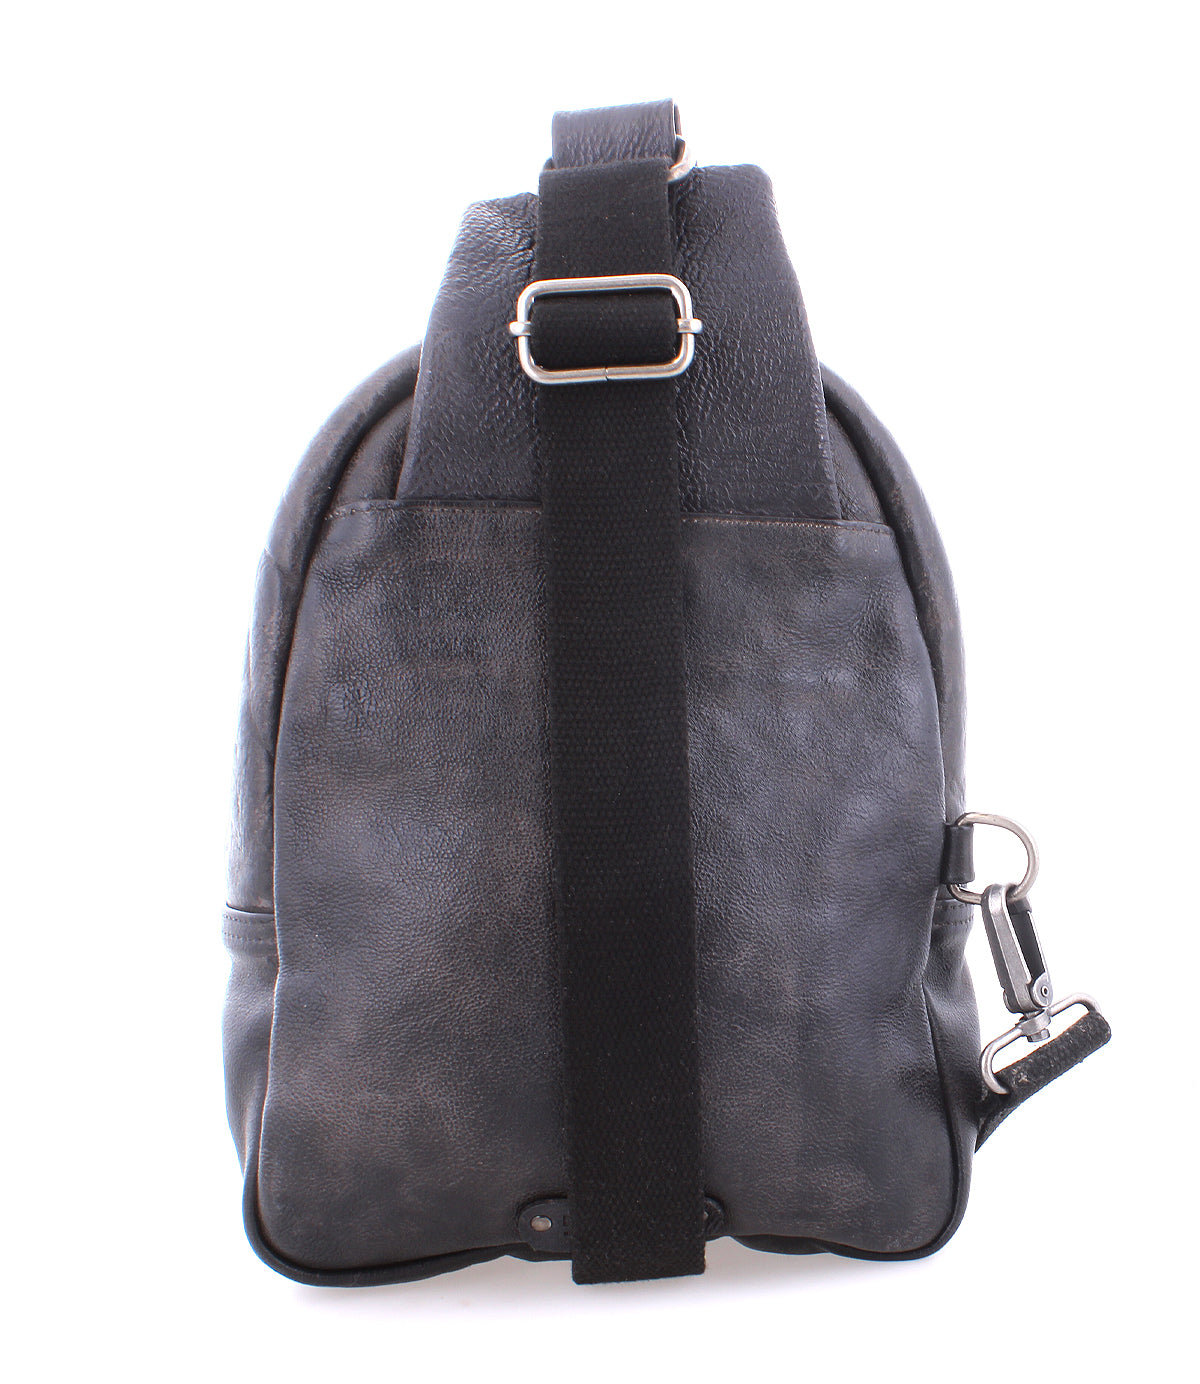 Black functional Beau leather backpack with adjustable strap and metal clasp by Bed Stu.